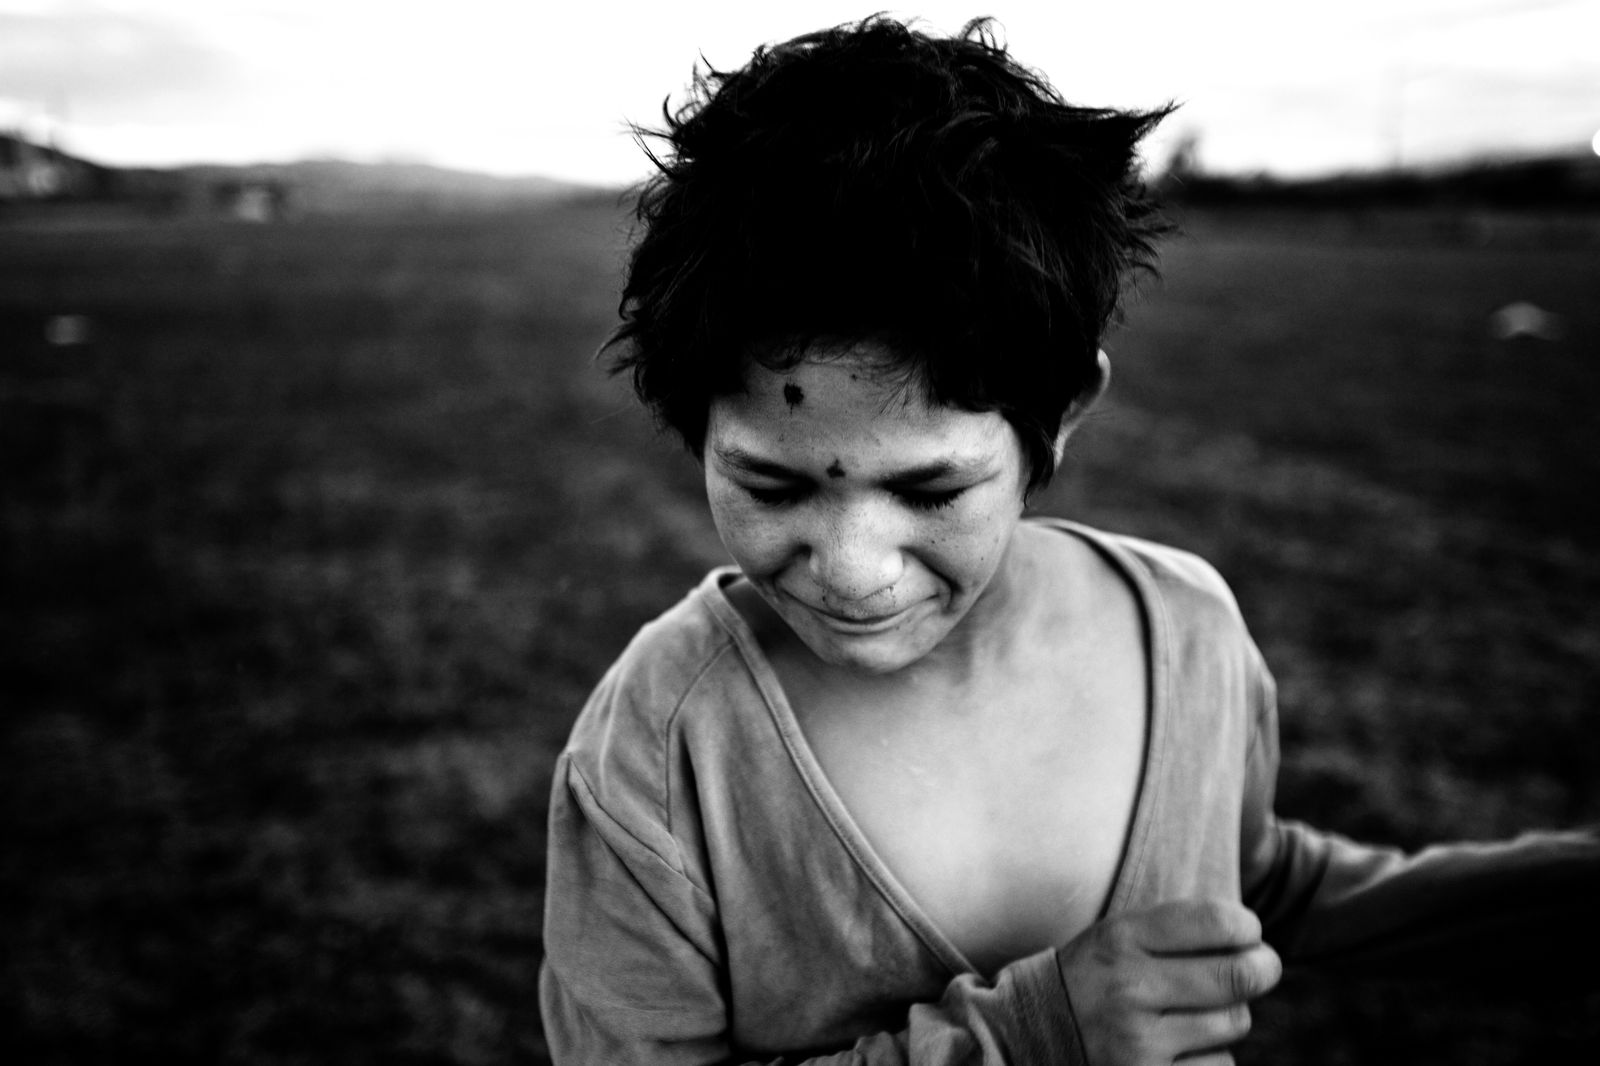 © Annalisa Natali Murri - Image from the Bad People Don't Sing photography project